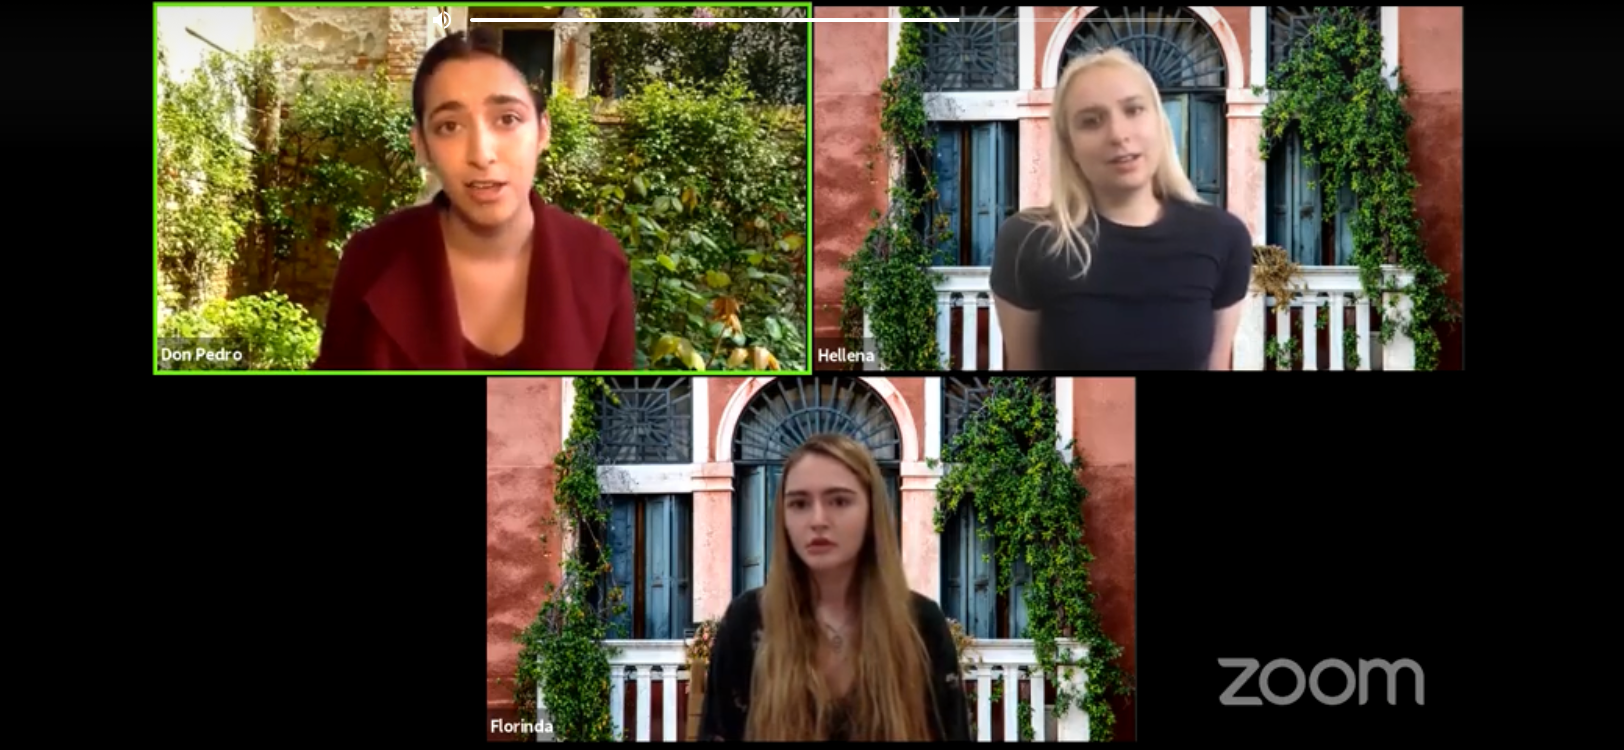 Three separate Zoom screens shared on one screen, each with an outdoor backdrop with ivy, character in top row, left to right Don Pedro and Hellena, and bottom row Florinda in the online reading of 